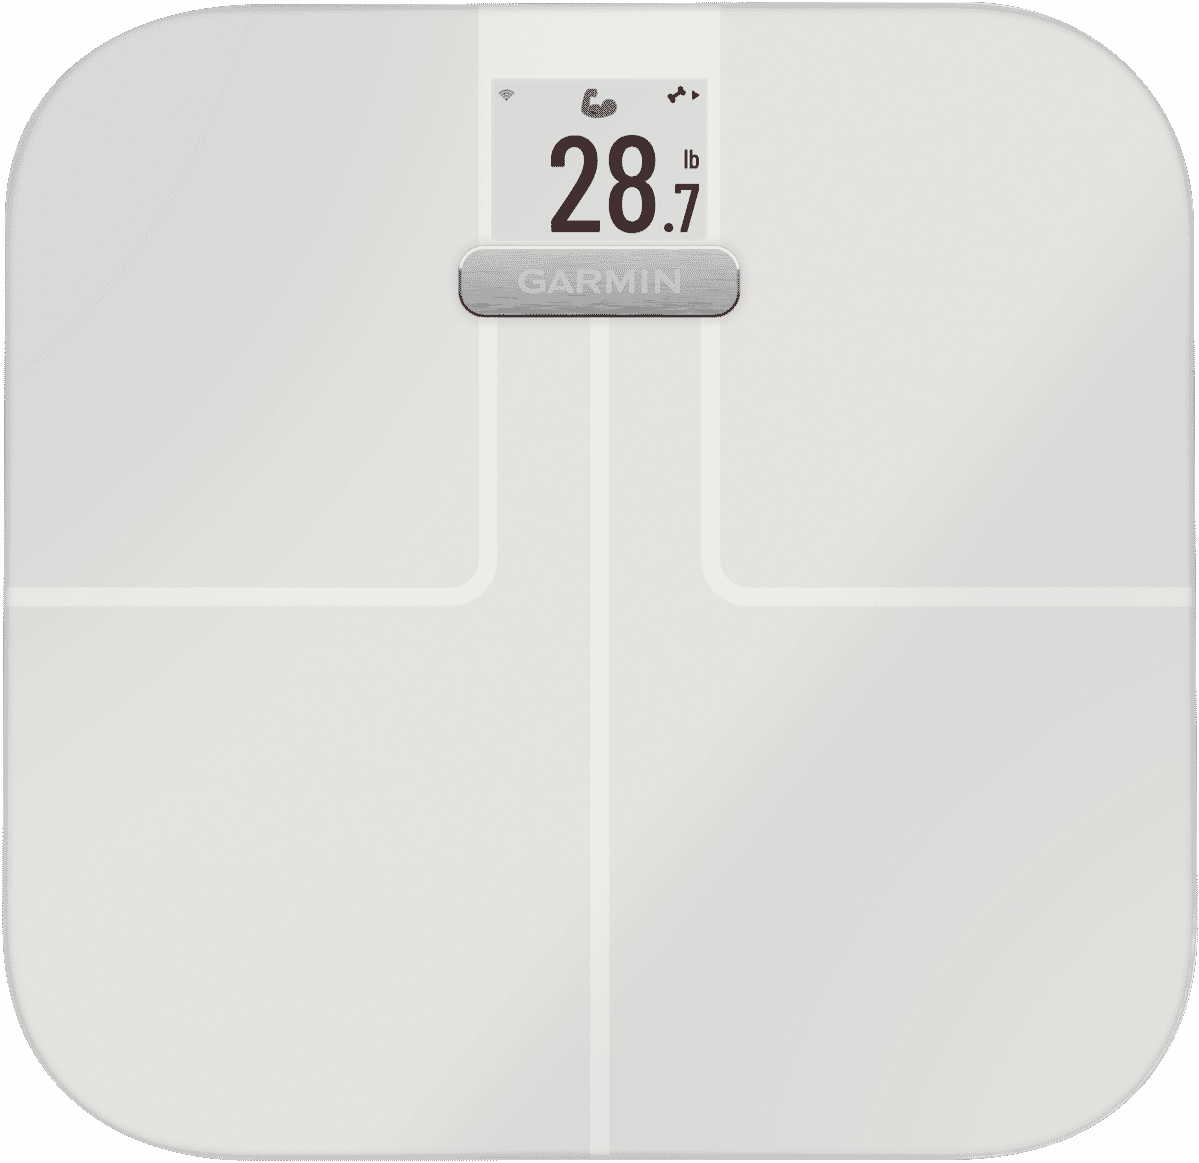 Garmin Index S2, Smart Scale with Wireless Connectivity, Measure Body Fat,  Muscle, Bone Mass, Body Water and More-White With Accessories 